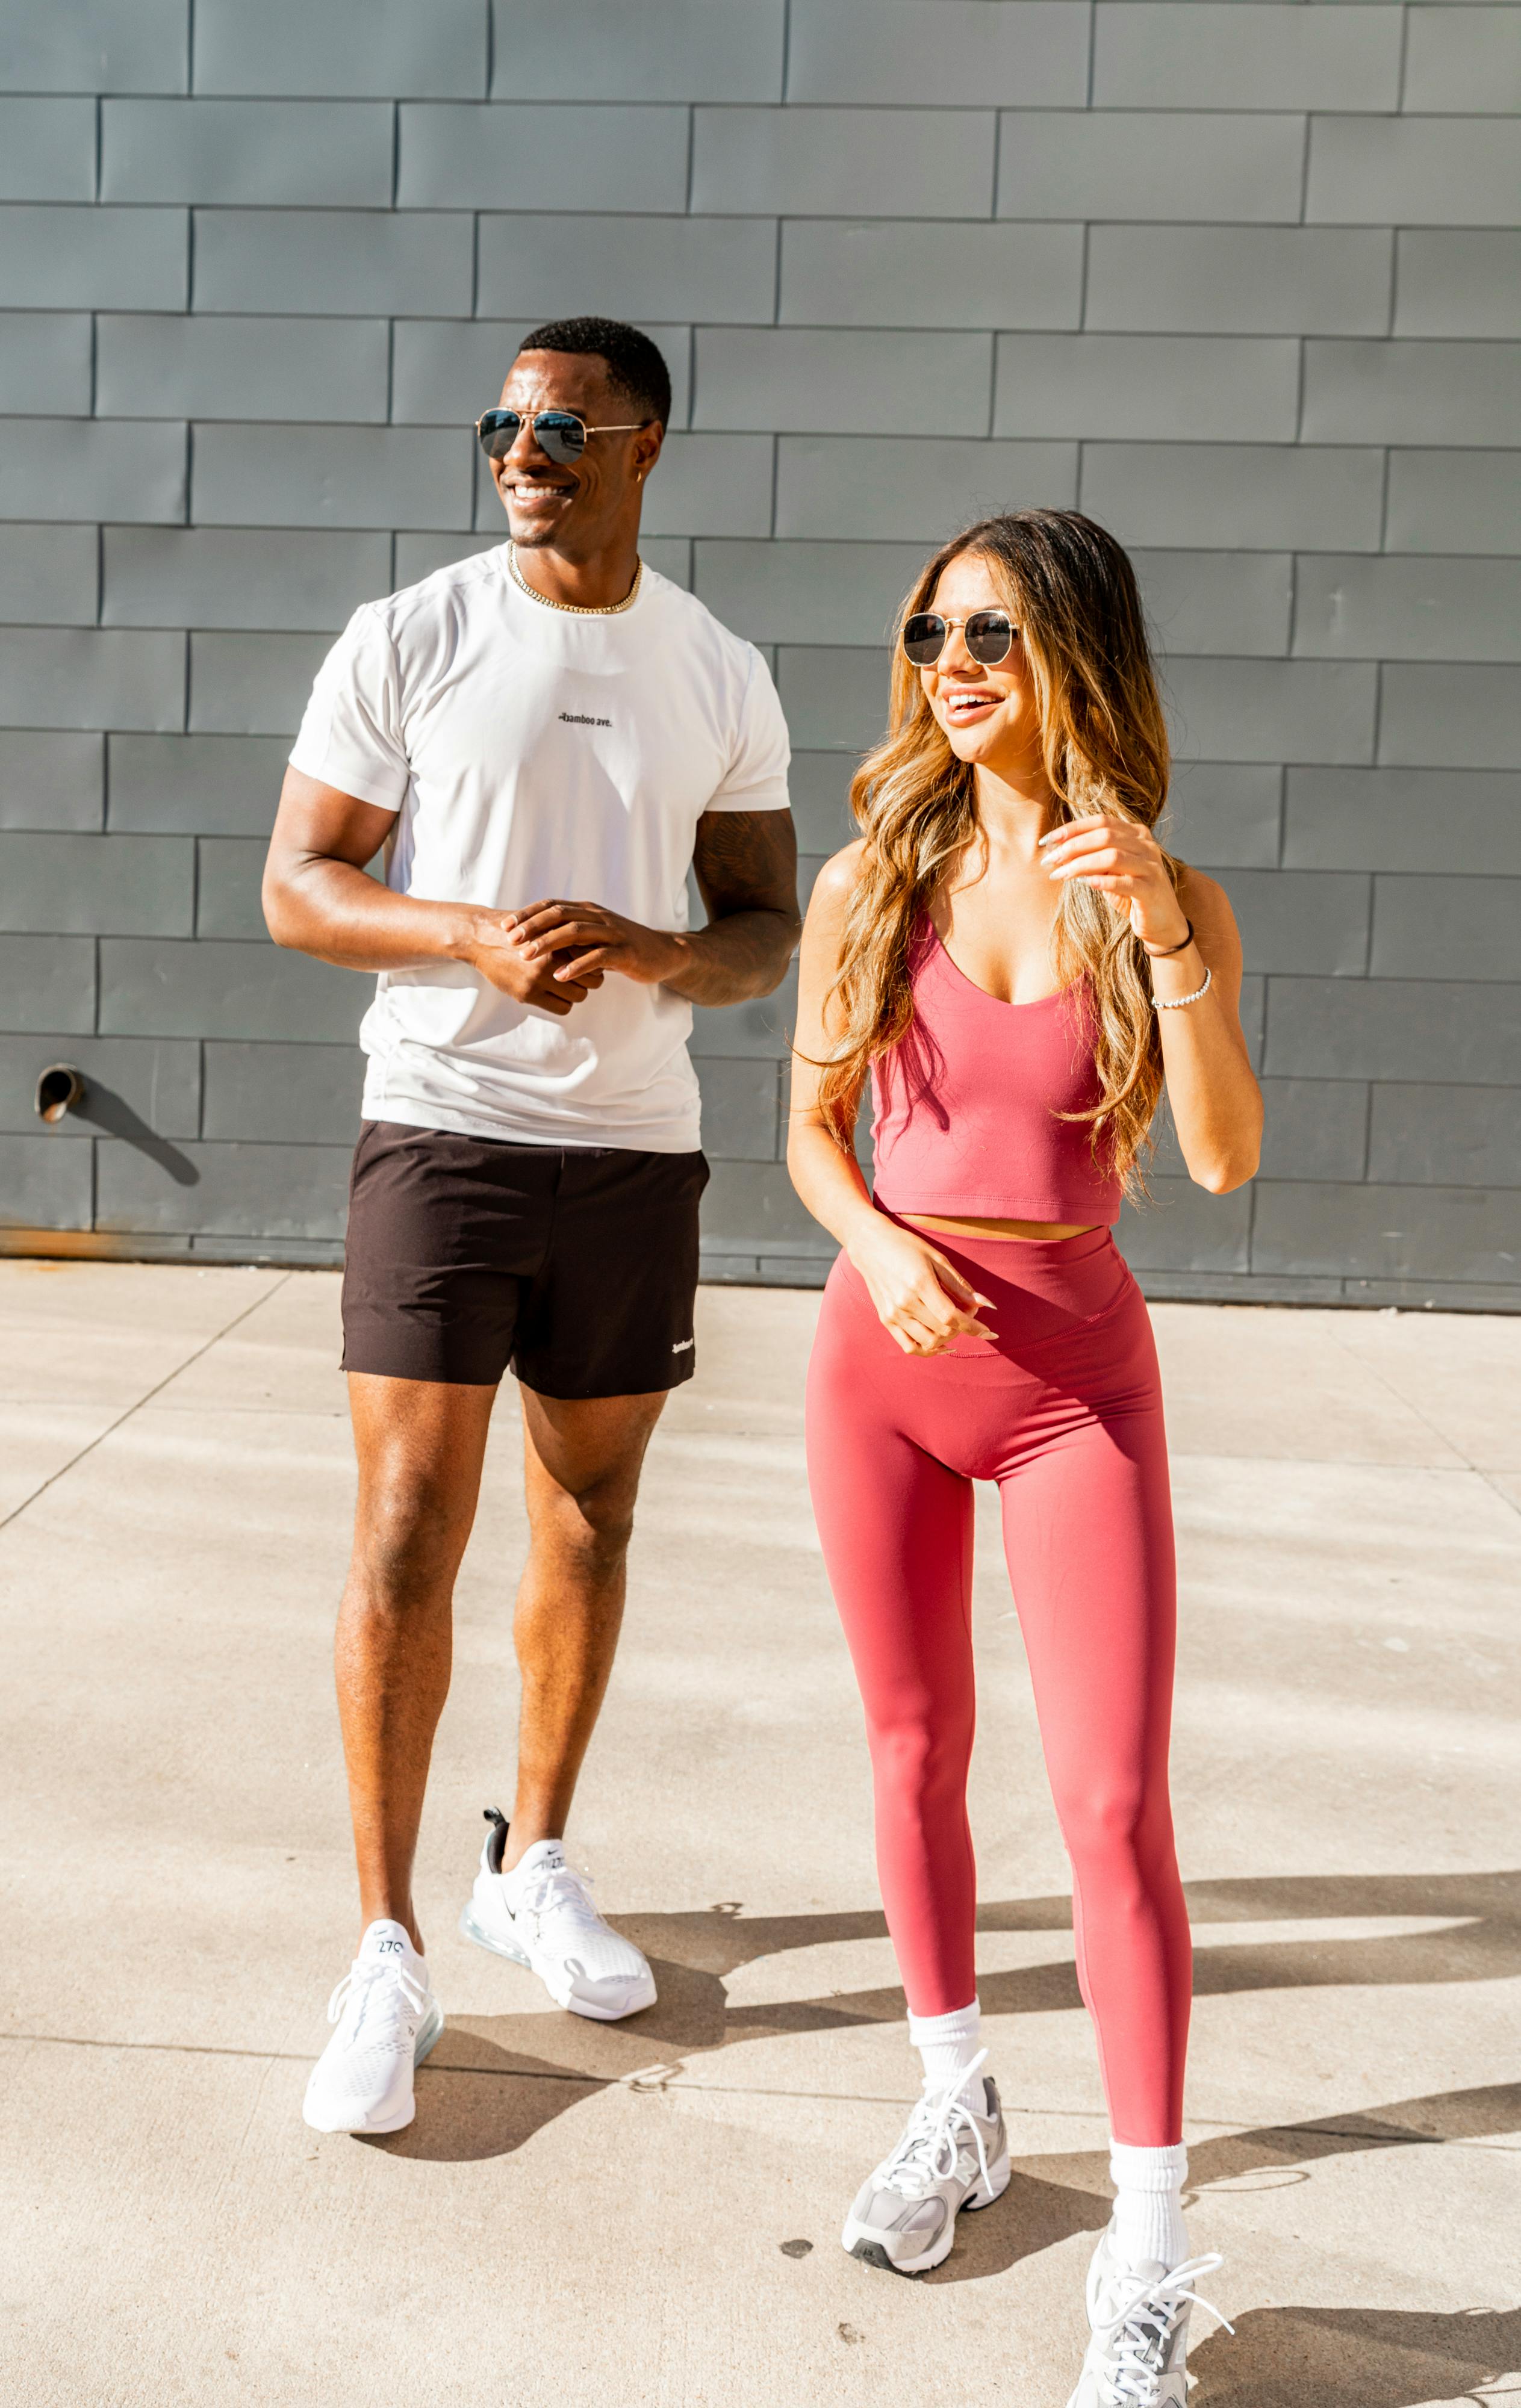 A man and woman in red workout clothes · Free Stock Photo